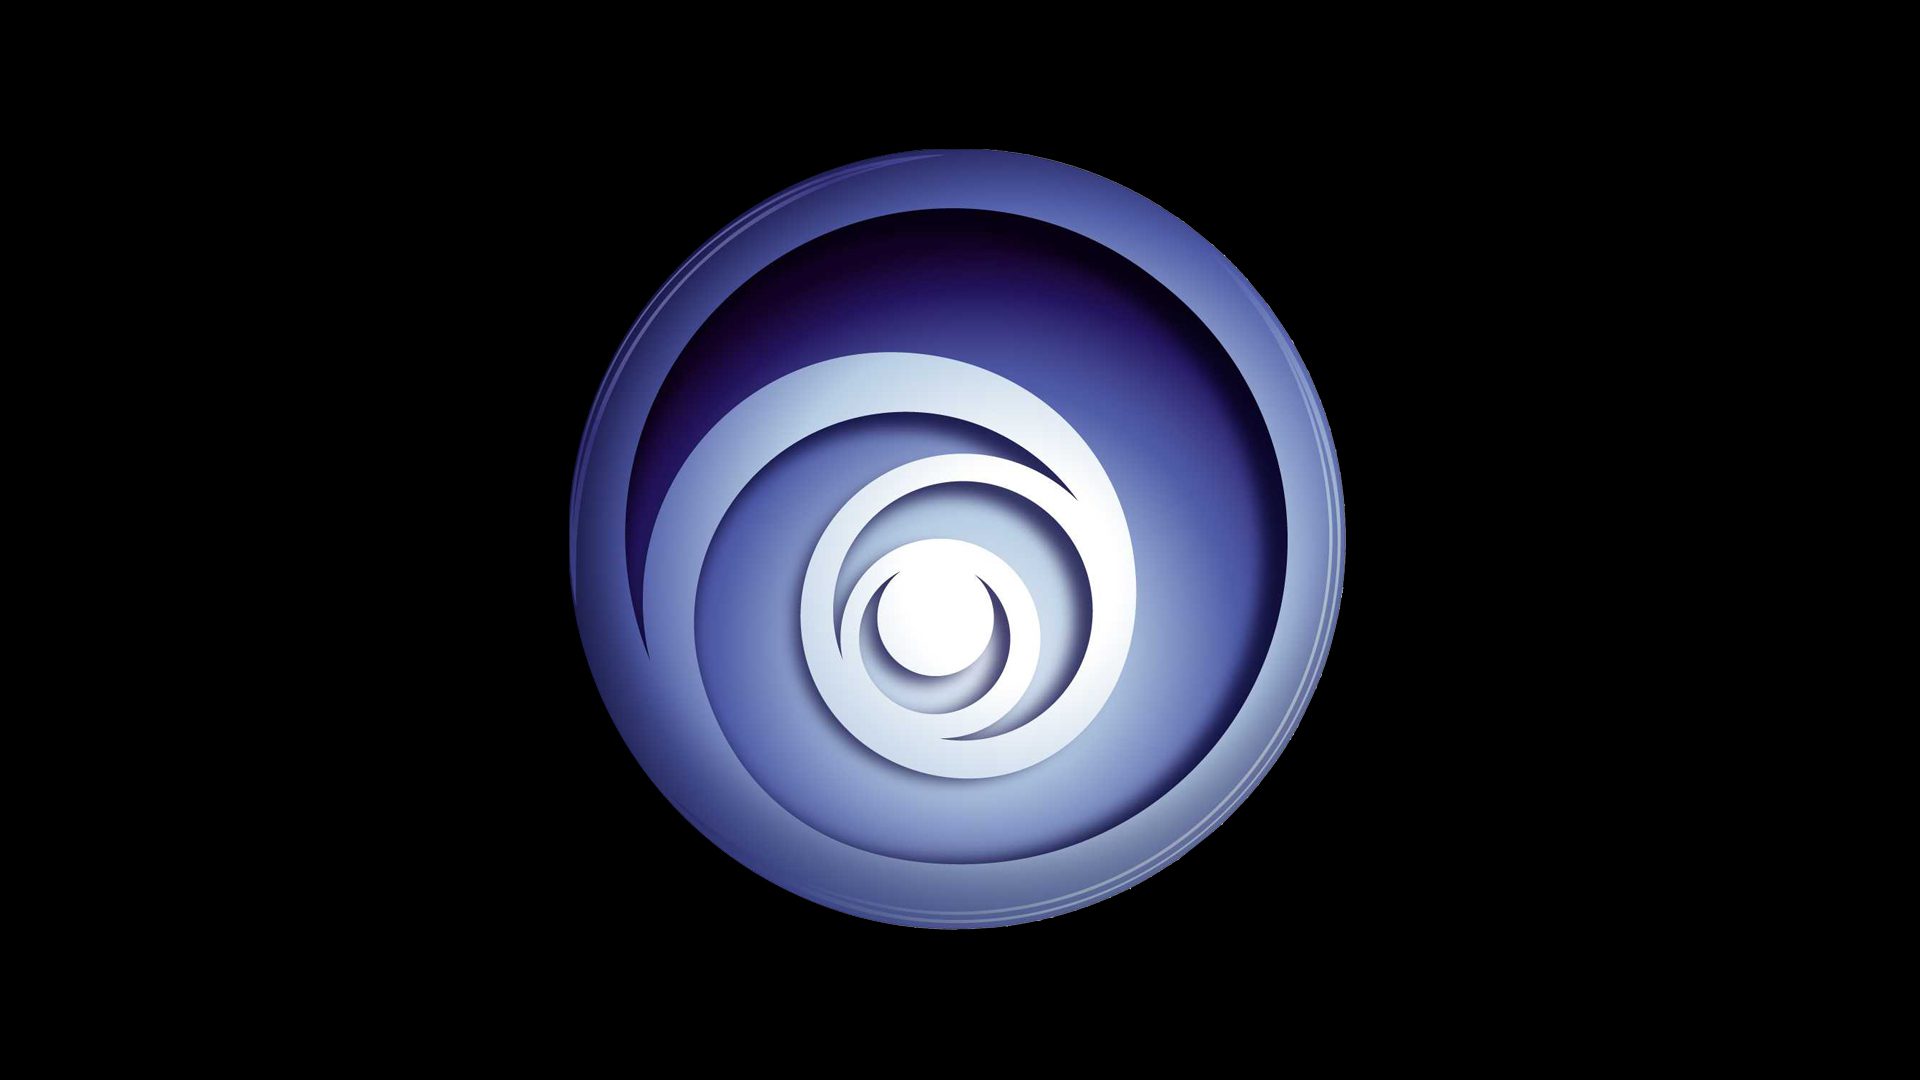 Reports indicate Vivendi is taking over Ubisoft sometime this year